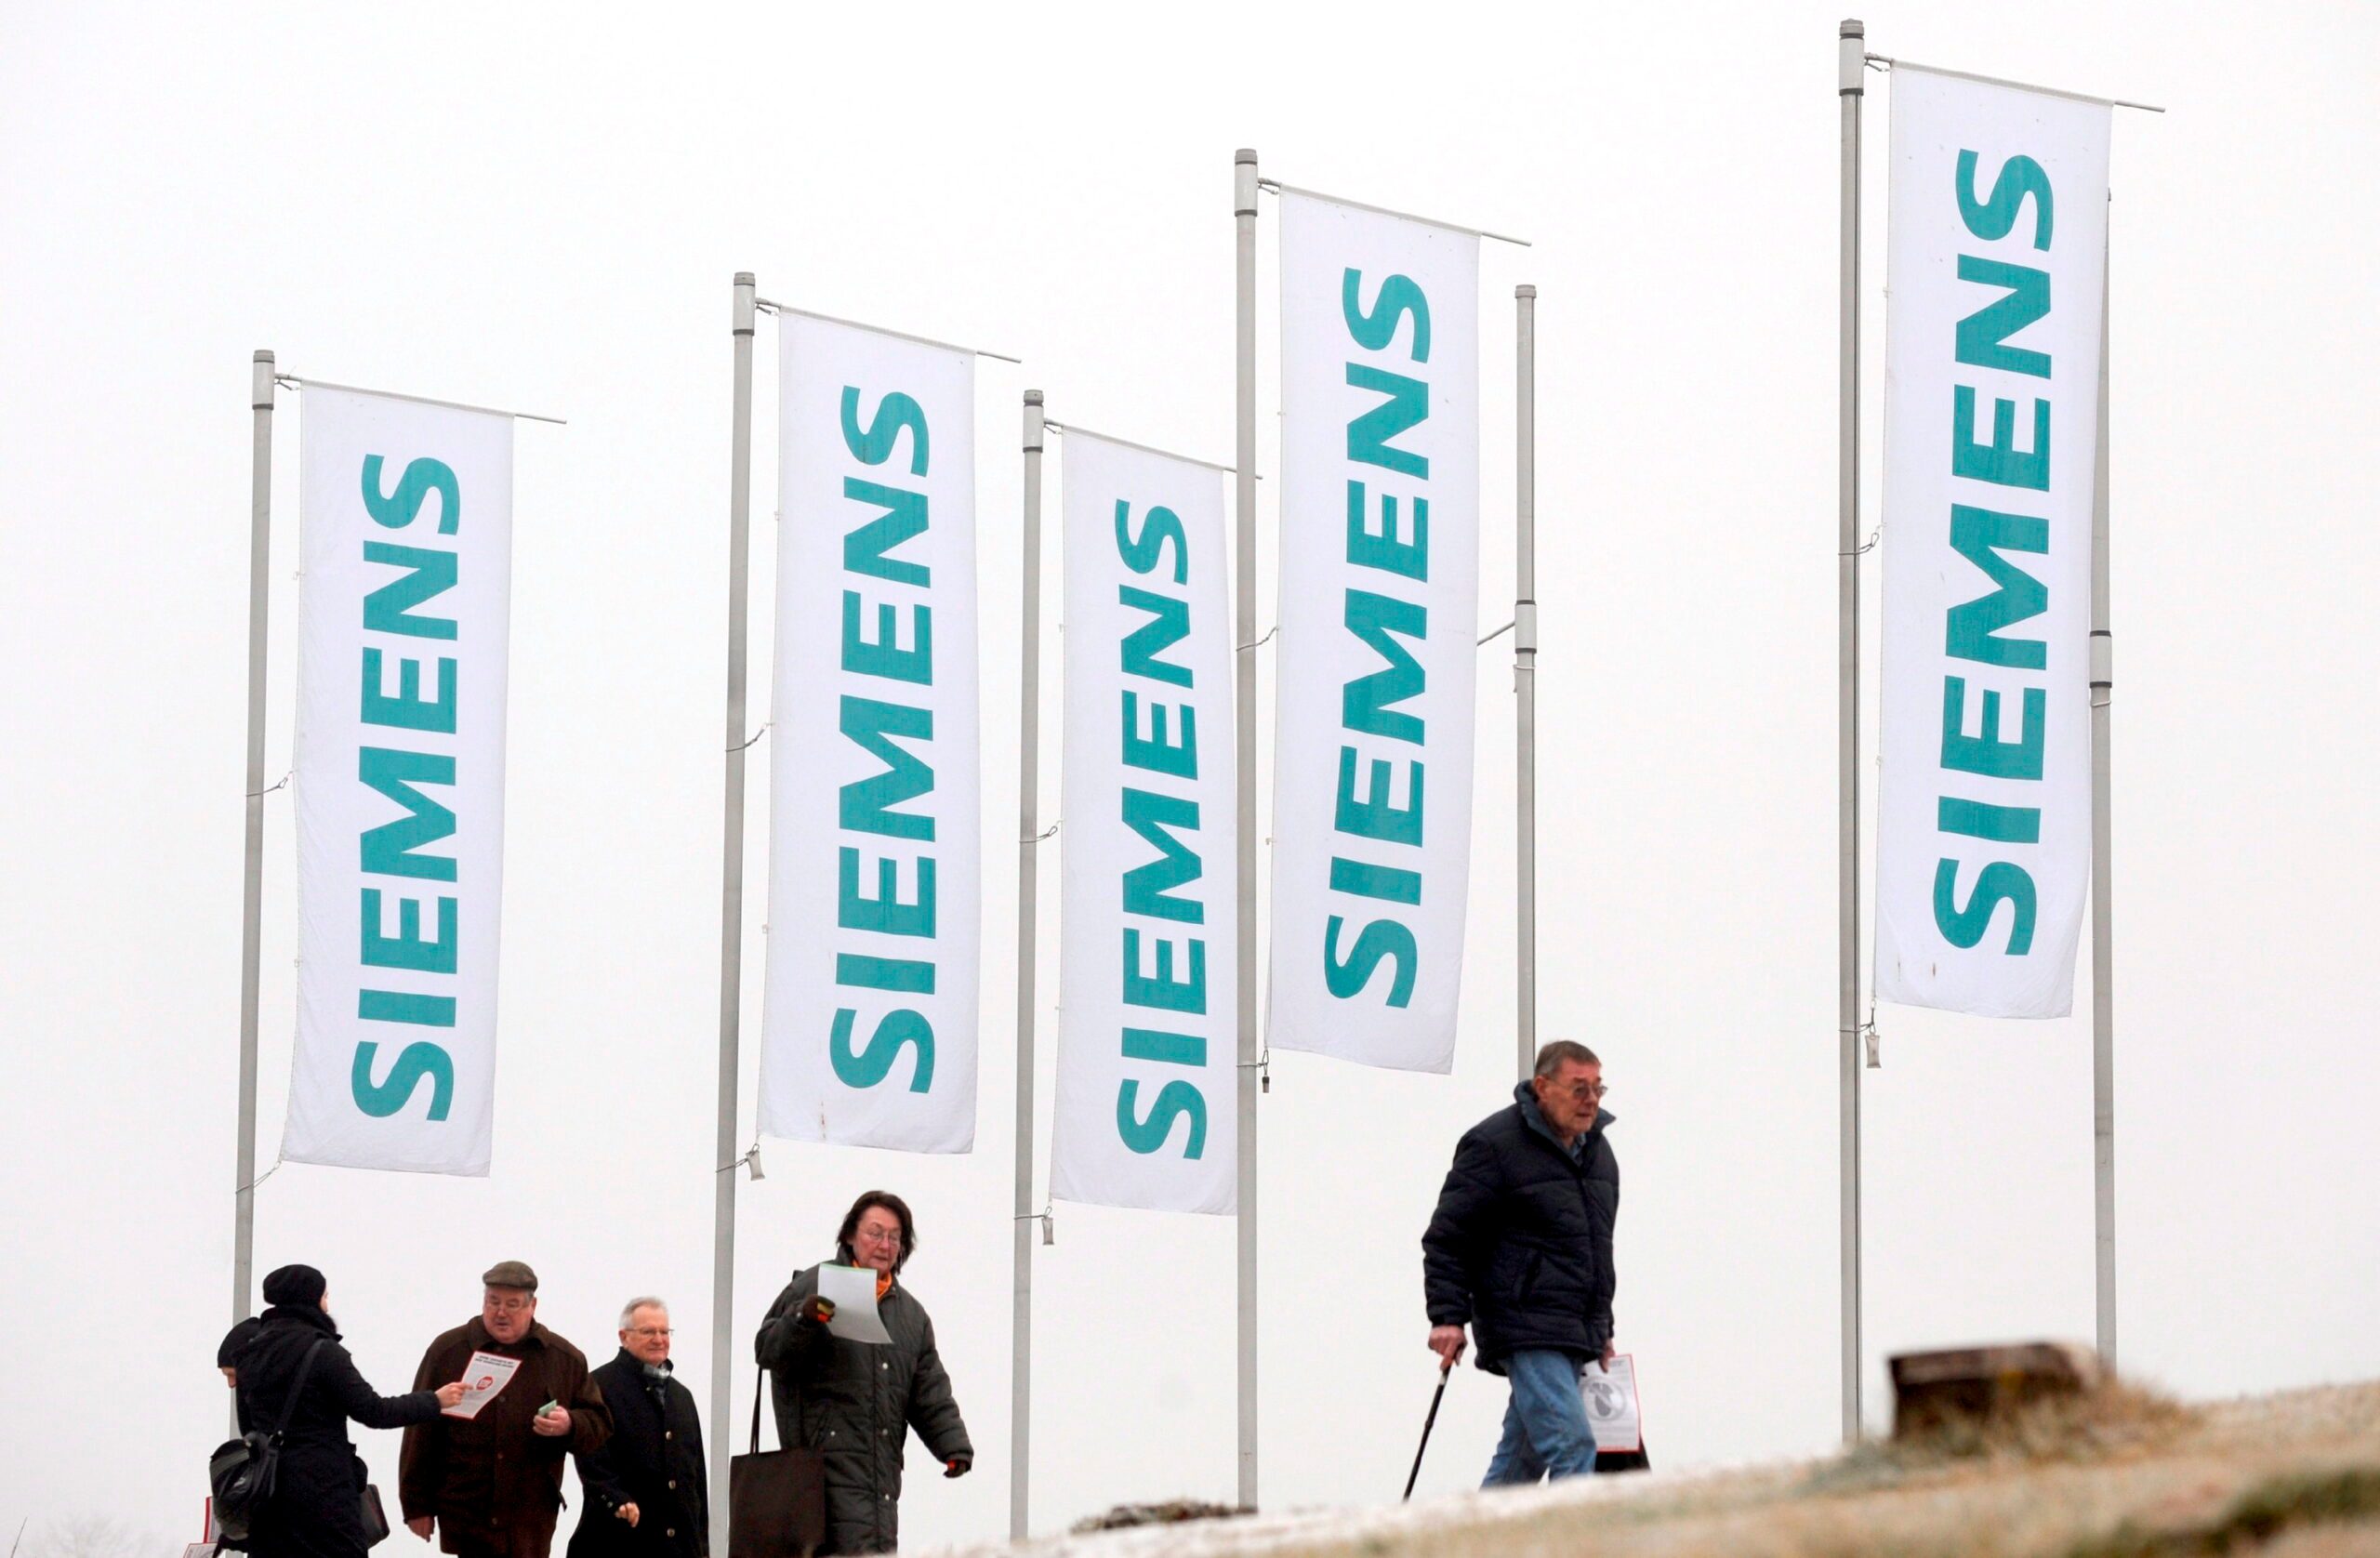 Siemens to cut 2,500 jobs in industrial division